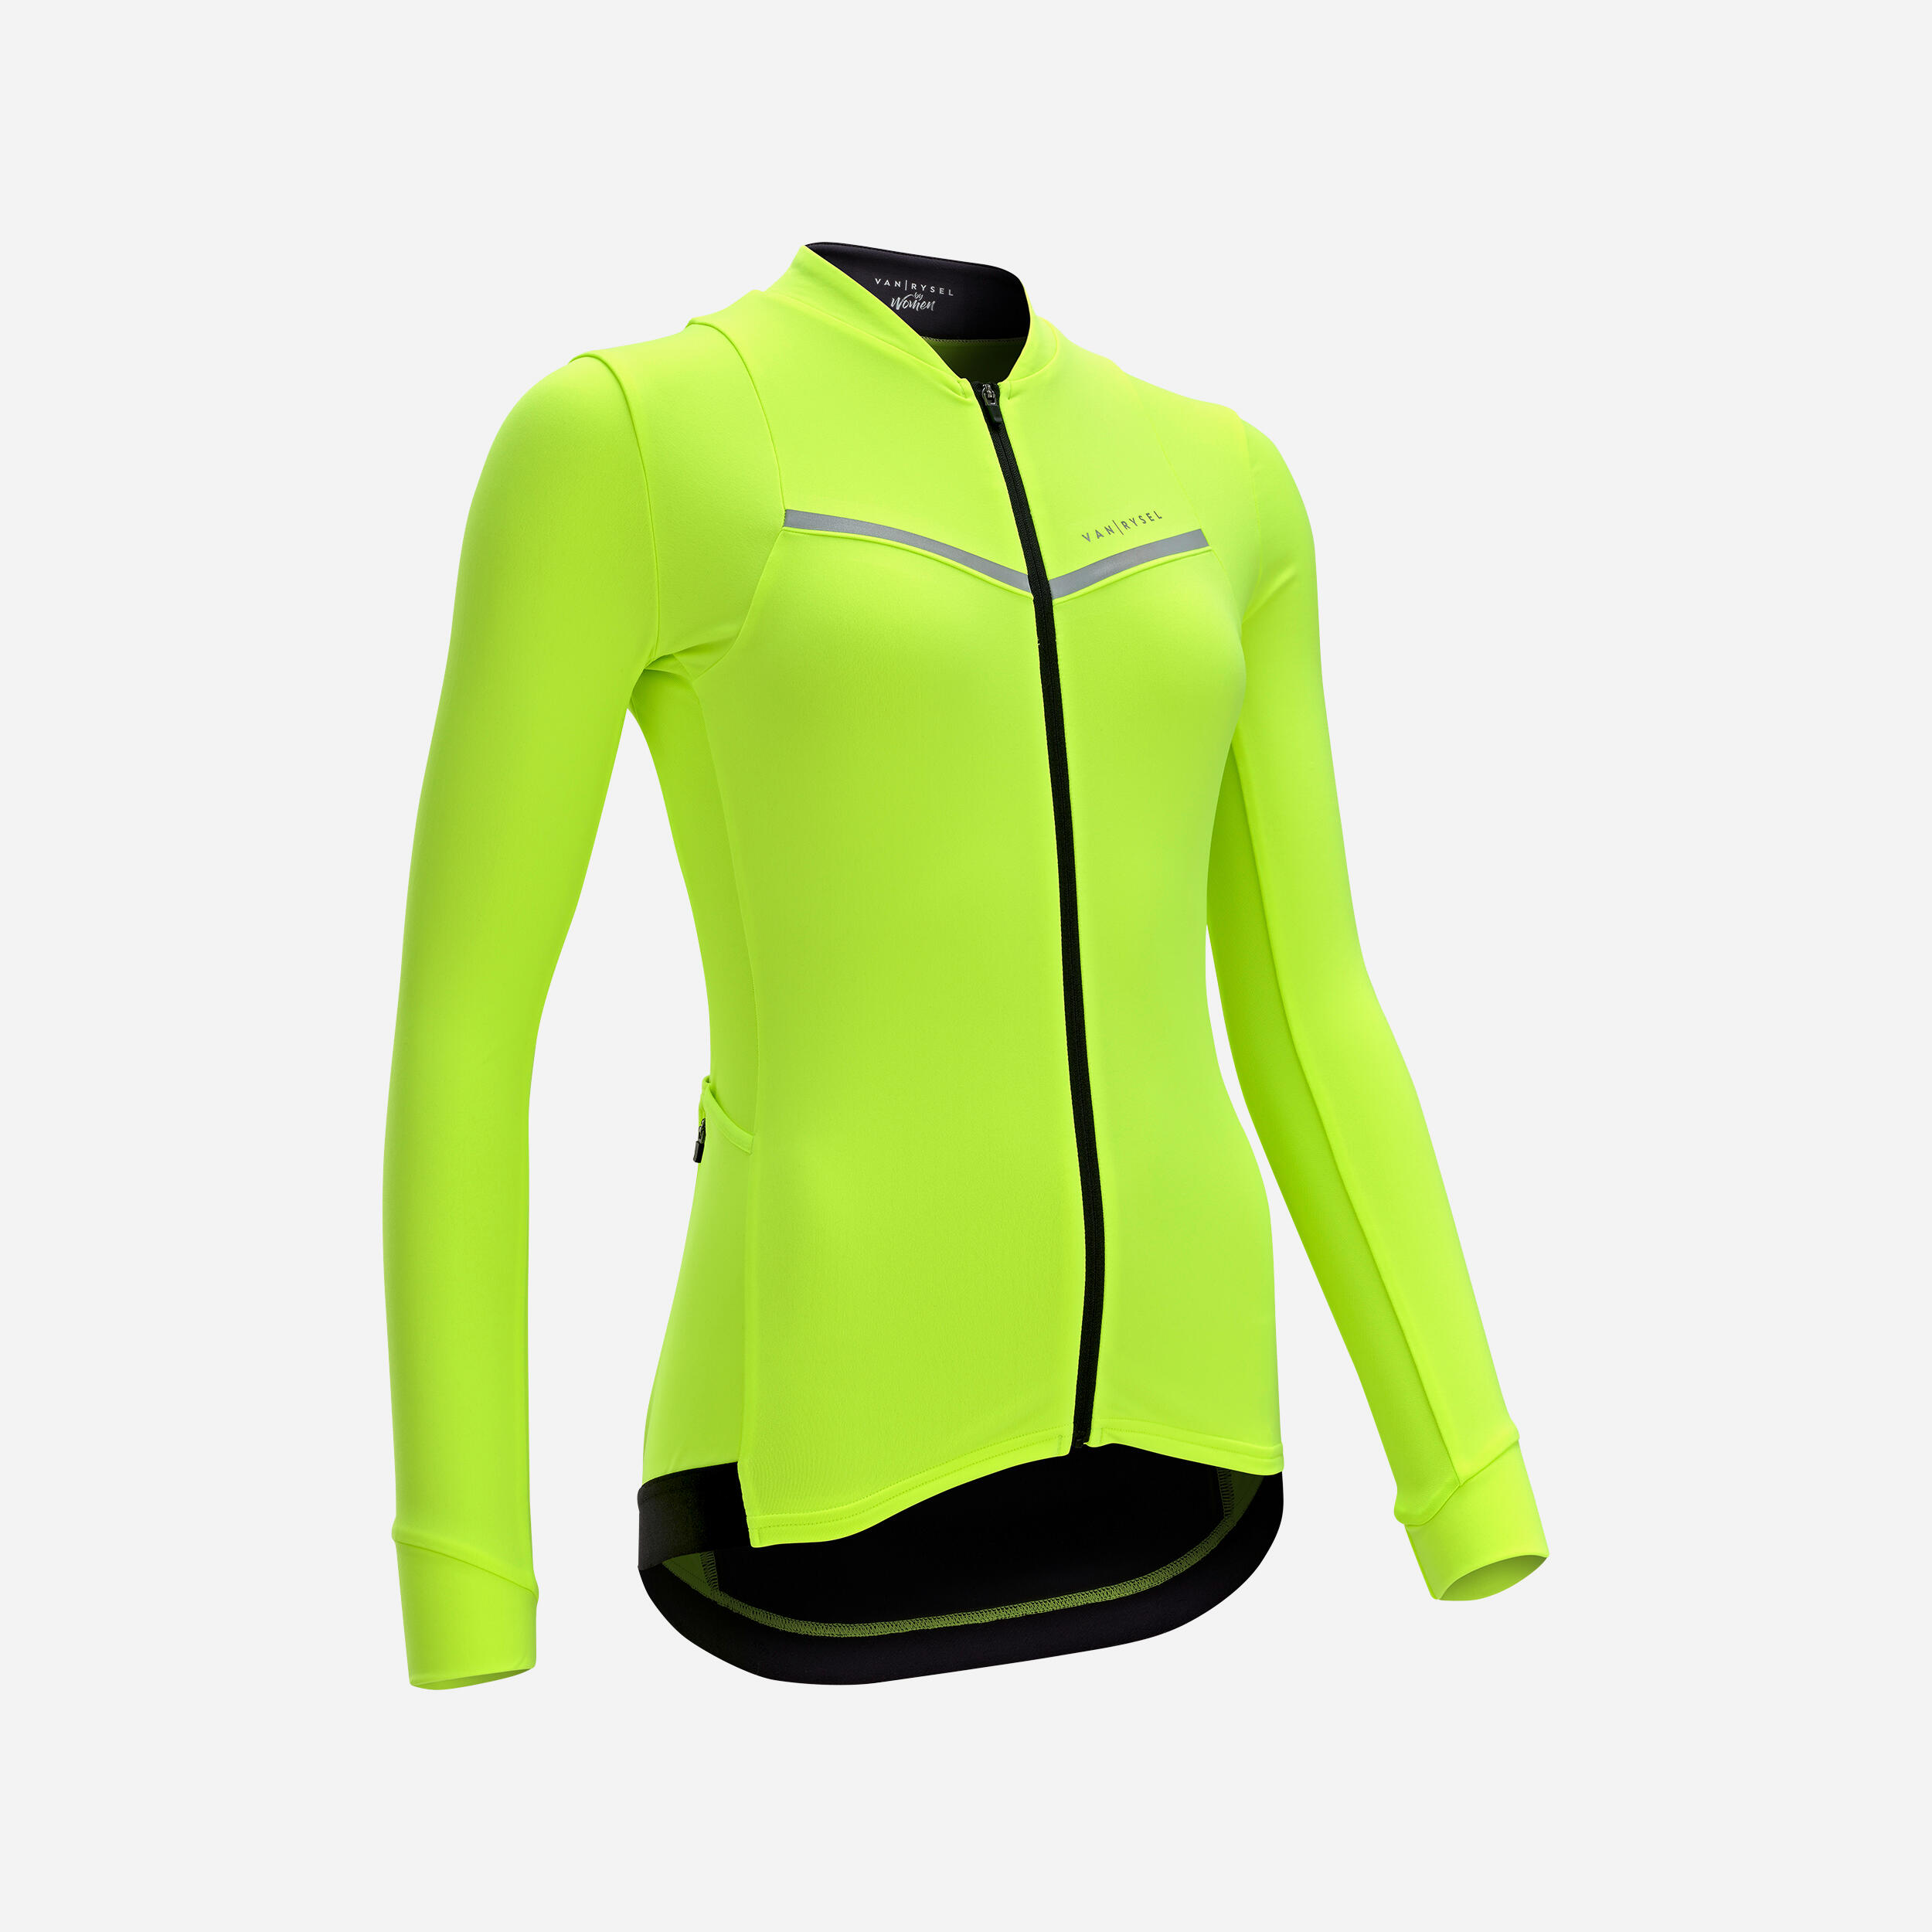 Women's Long-Sleeved Road Cycling Jersey - Yellow 2/7